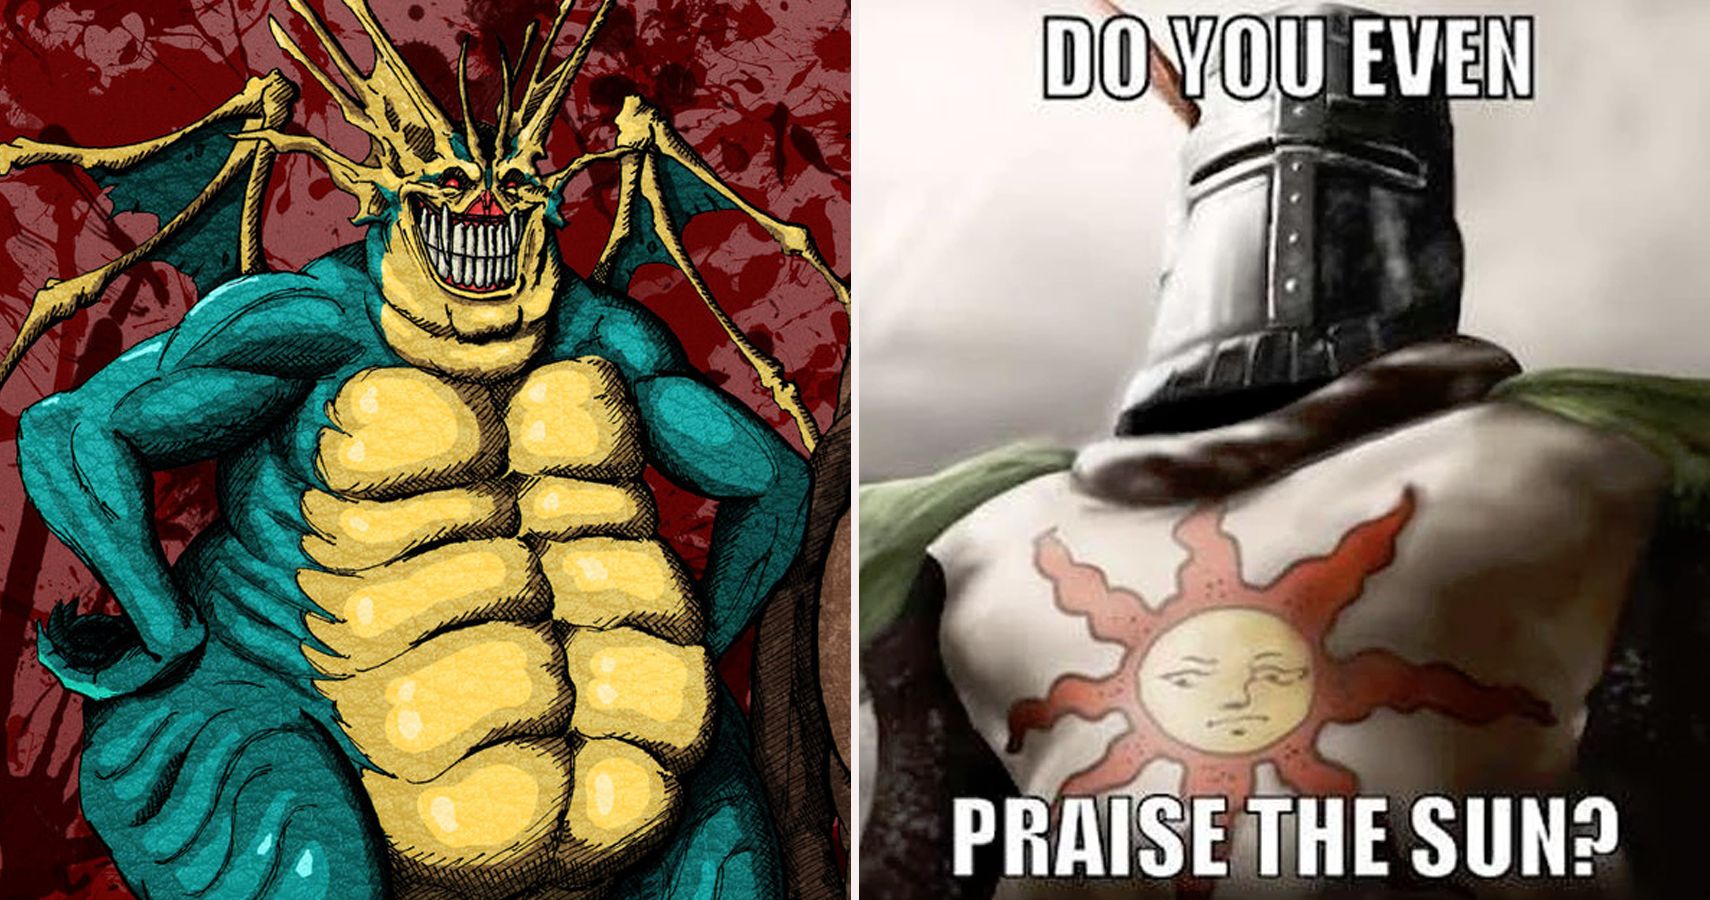 Dark Souls Memes That Are Hilarious (For TRUE Fans)